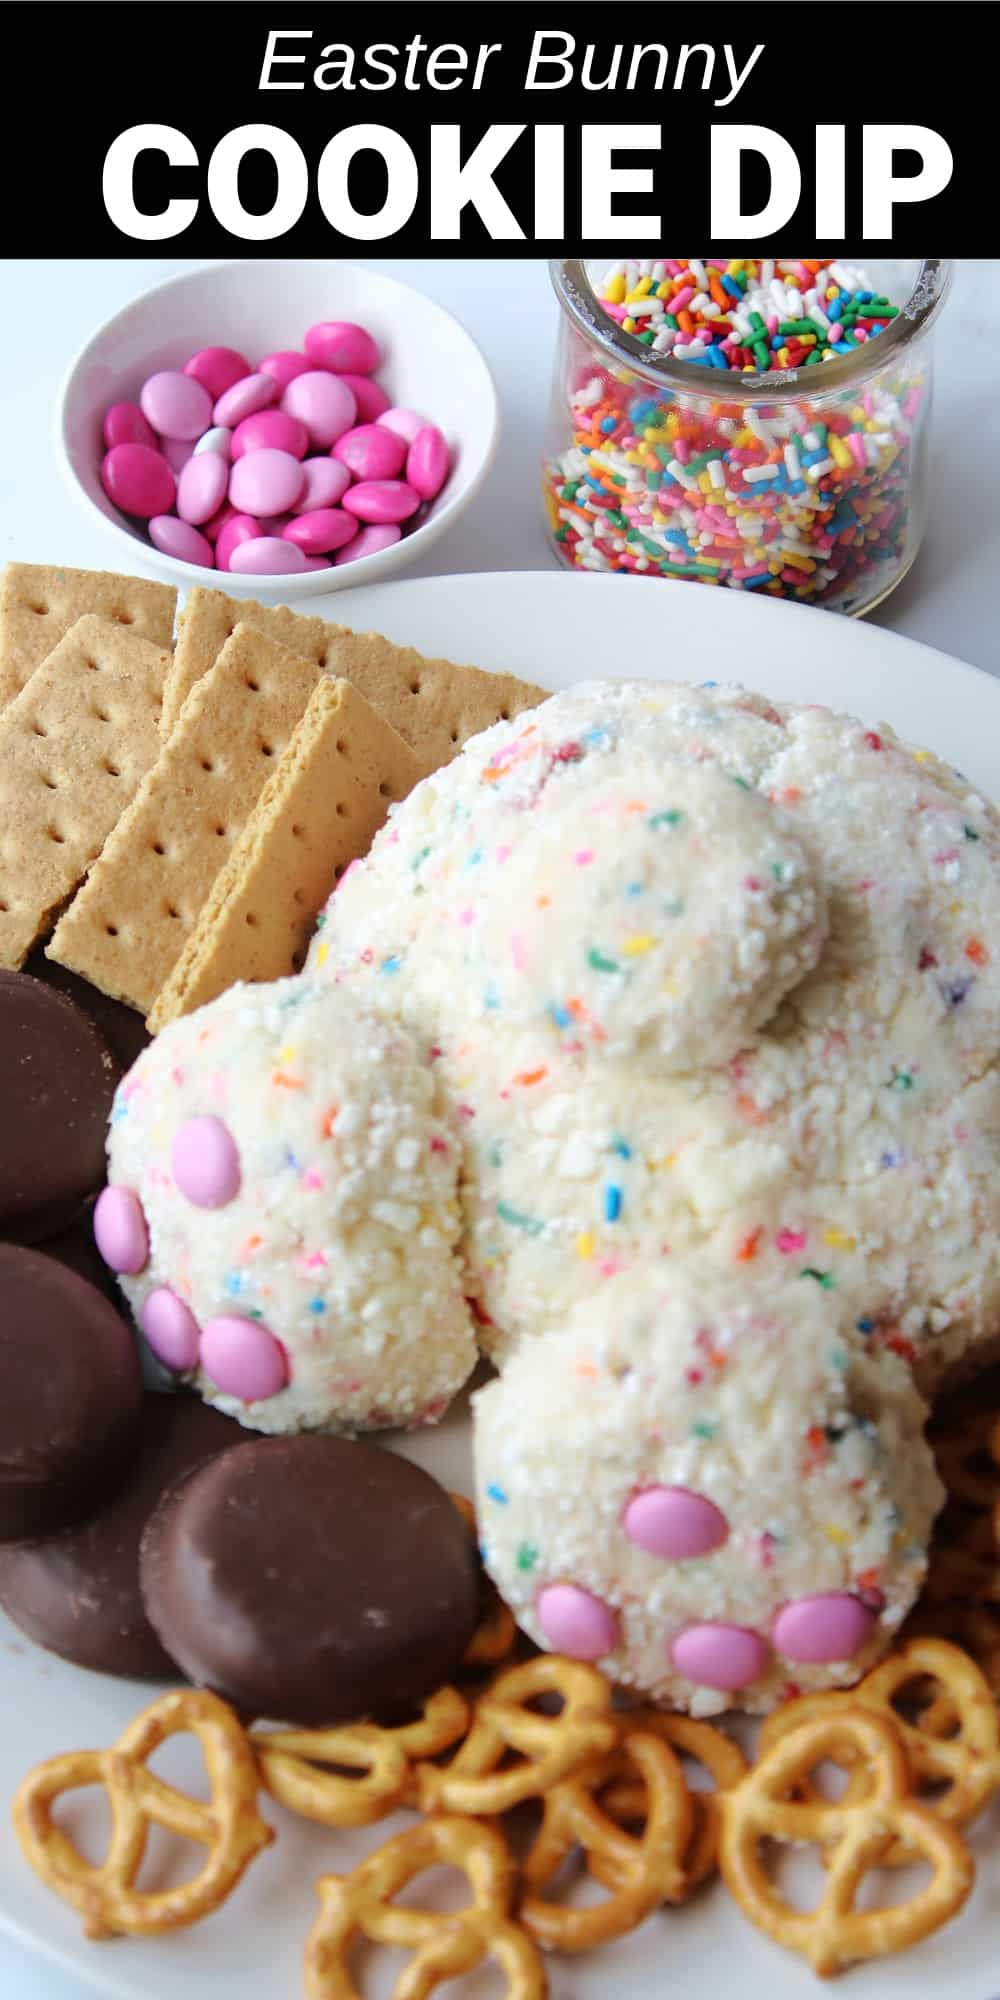 This bunny cookie dip is an adorable and delicious way to celebrate spring. With a sweet confetti cake flavor and a cute bunny shape, this unique and festive dip will be a huge hit at any spring party or Easter brunch.